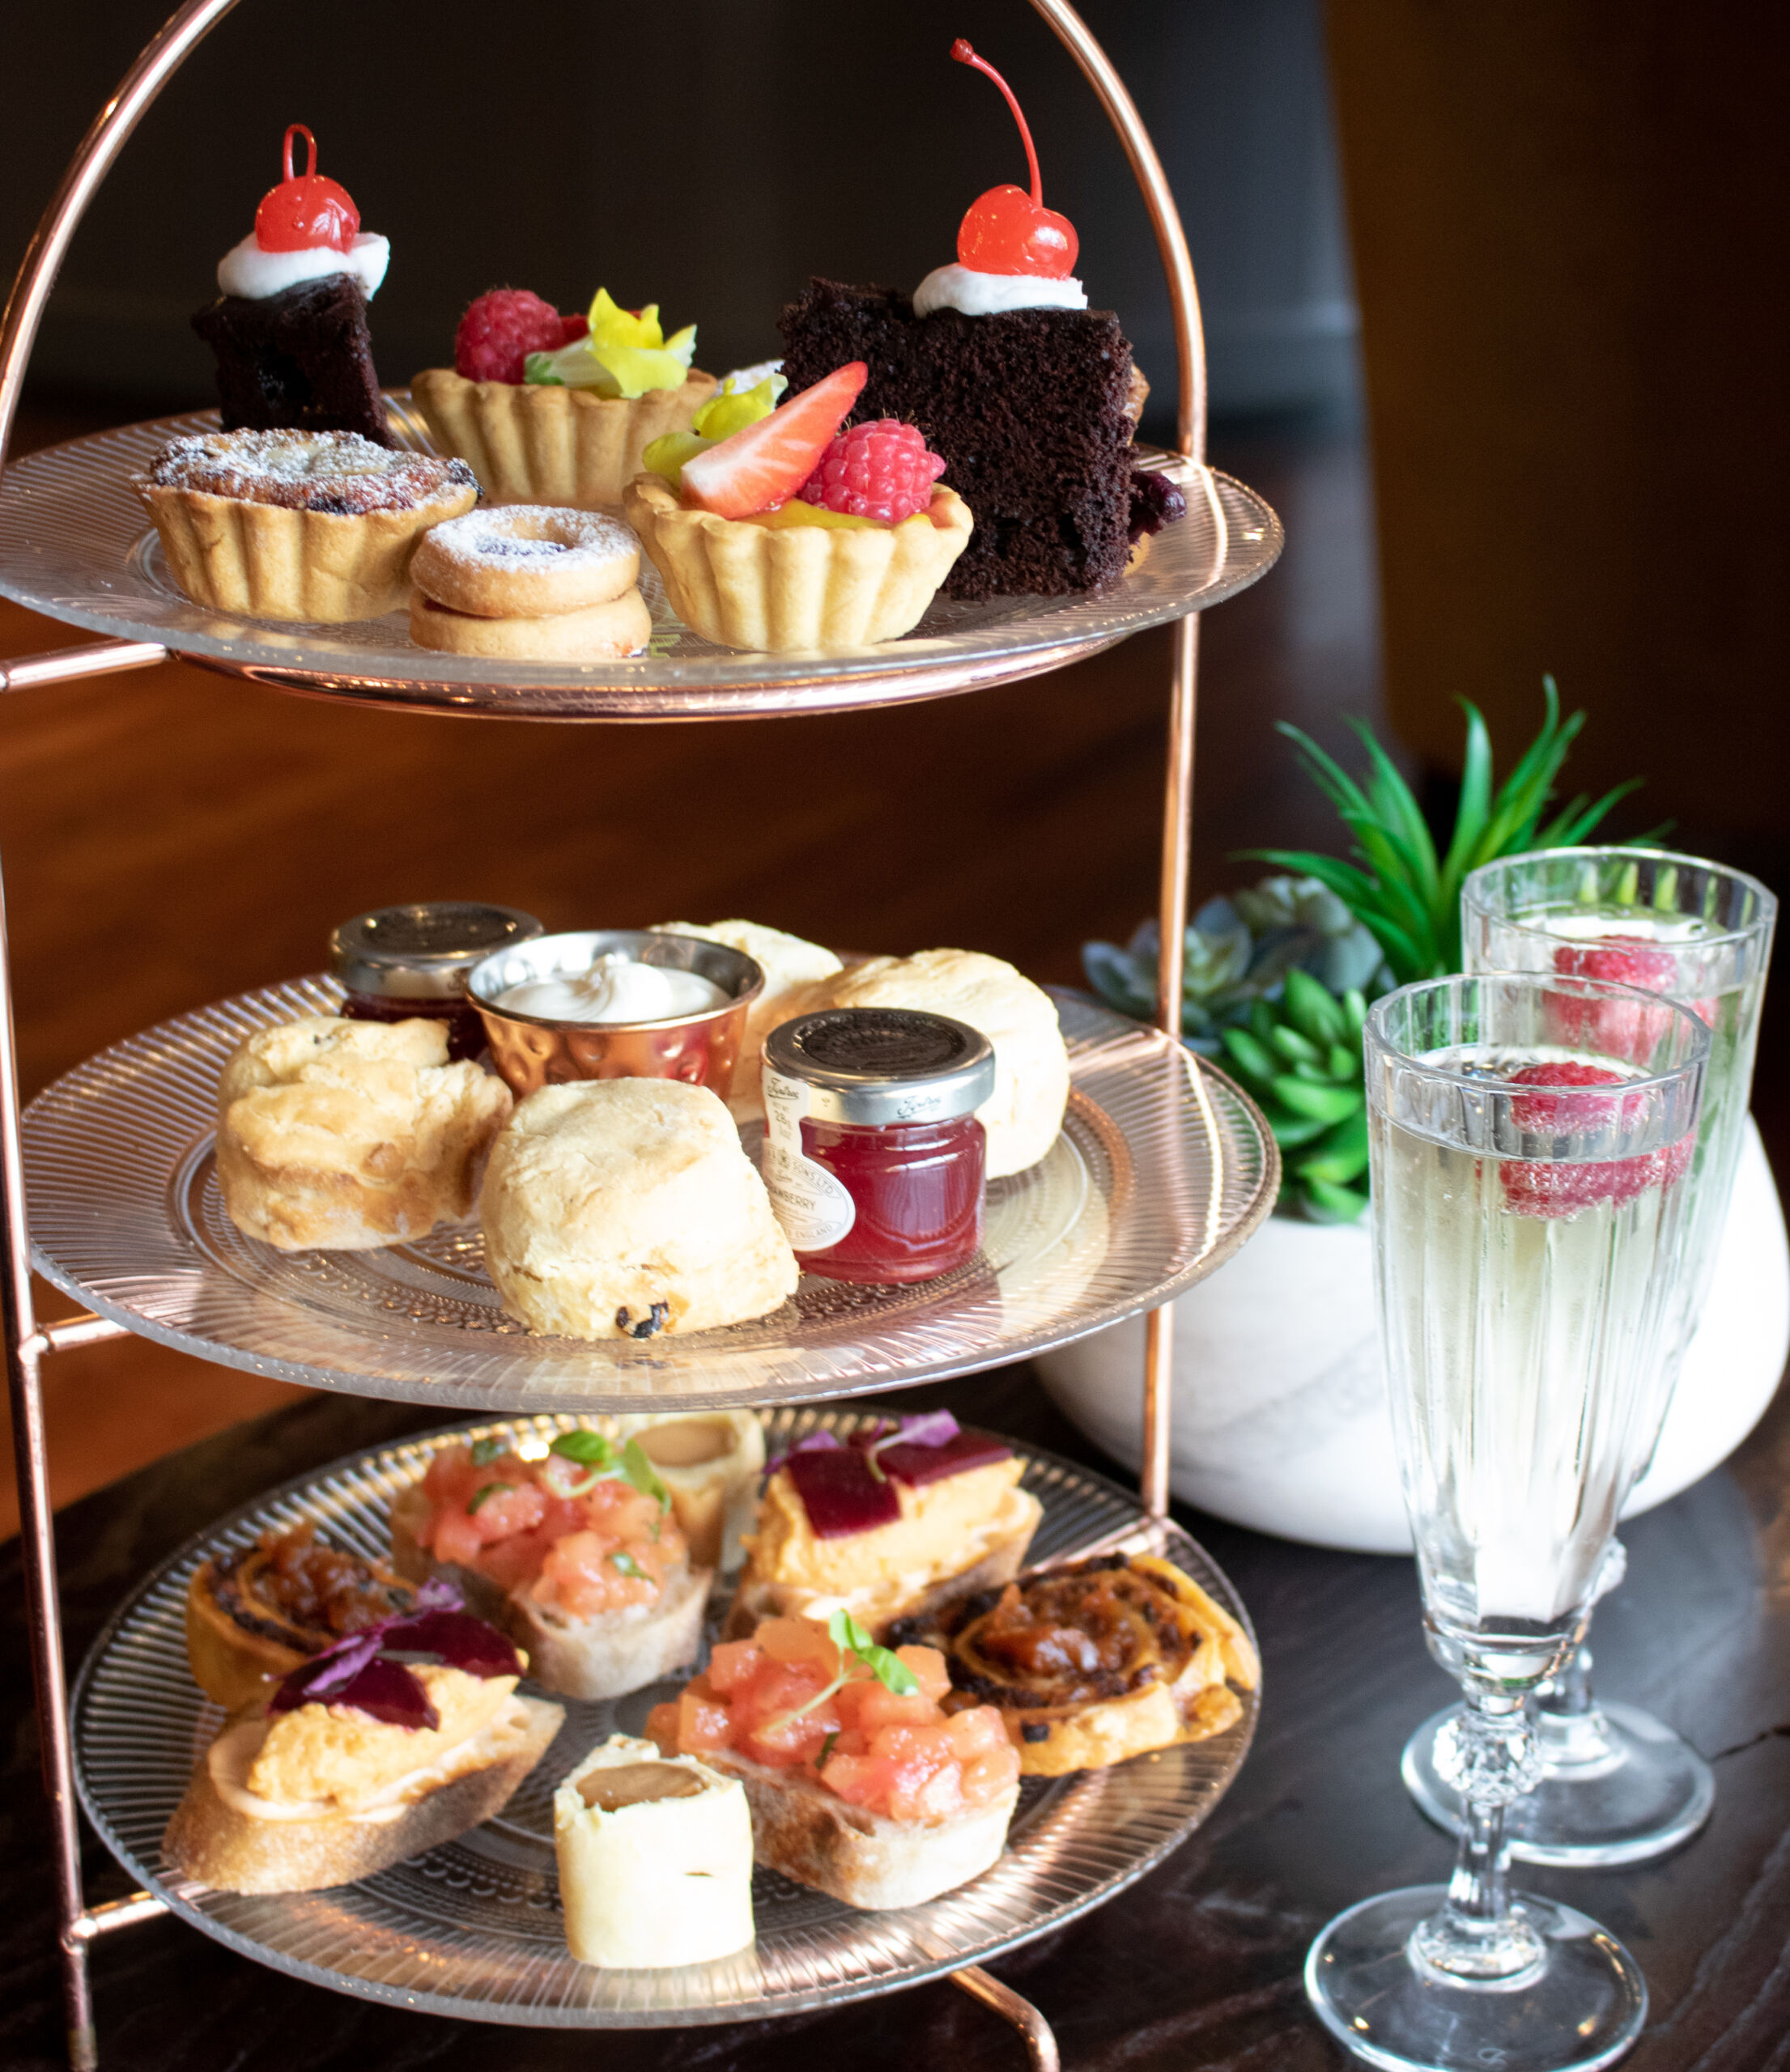 Join us for decadent Afternoon Tea in Brewhemia Edinburgh city centre